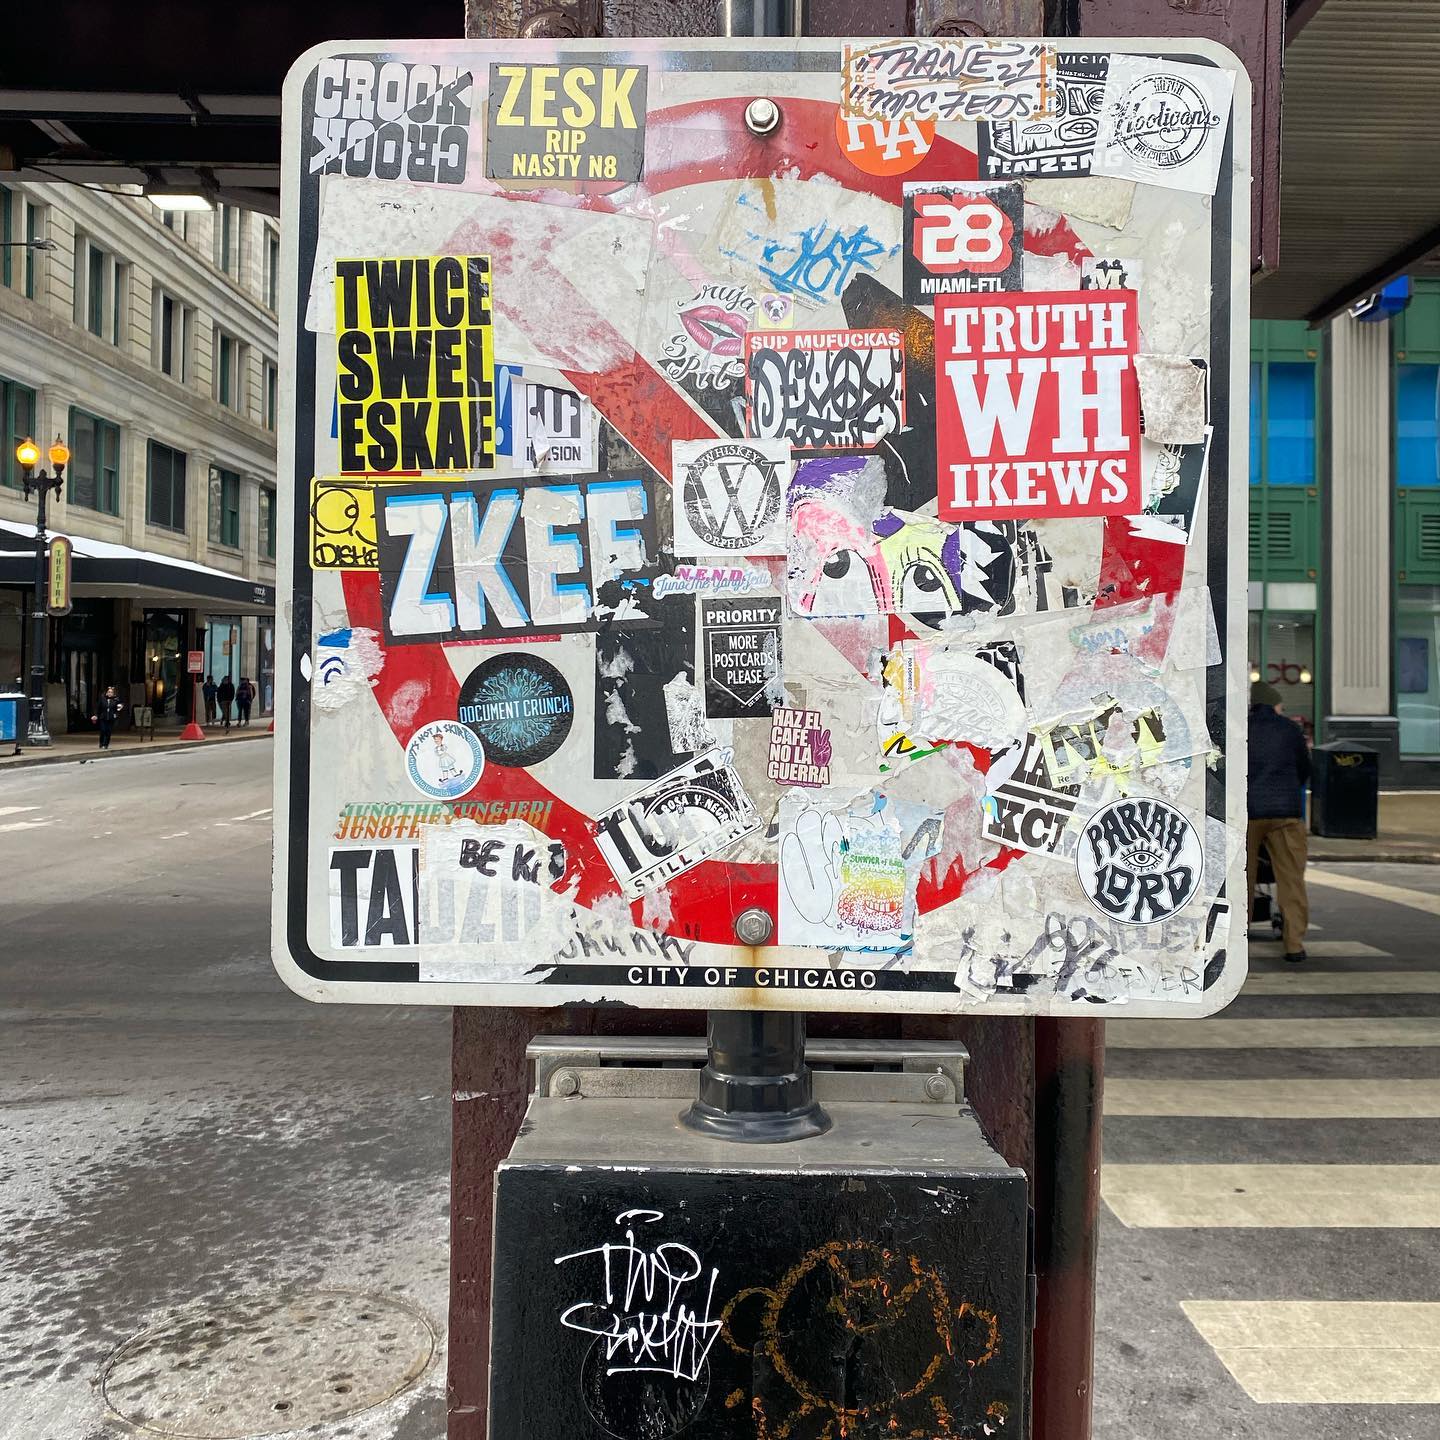 Downtown is pretty empty of people, today, but there are signs of life! #stickers #graffiti #wabash #chicagoloop #downtownchicago